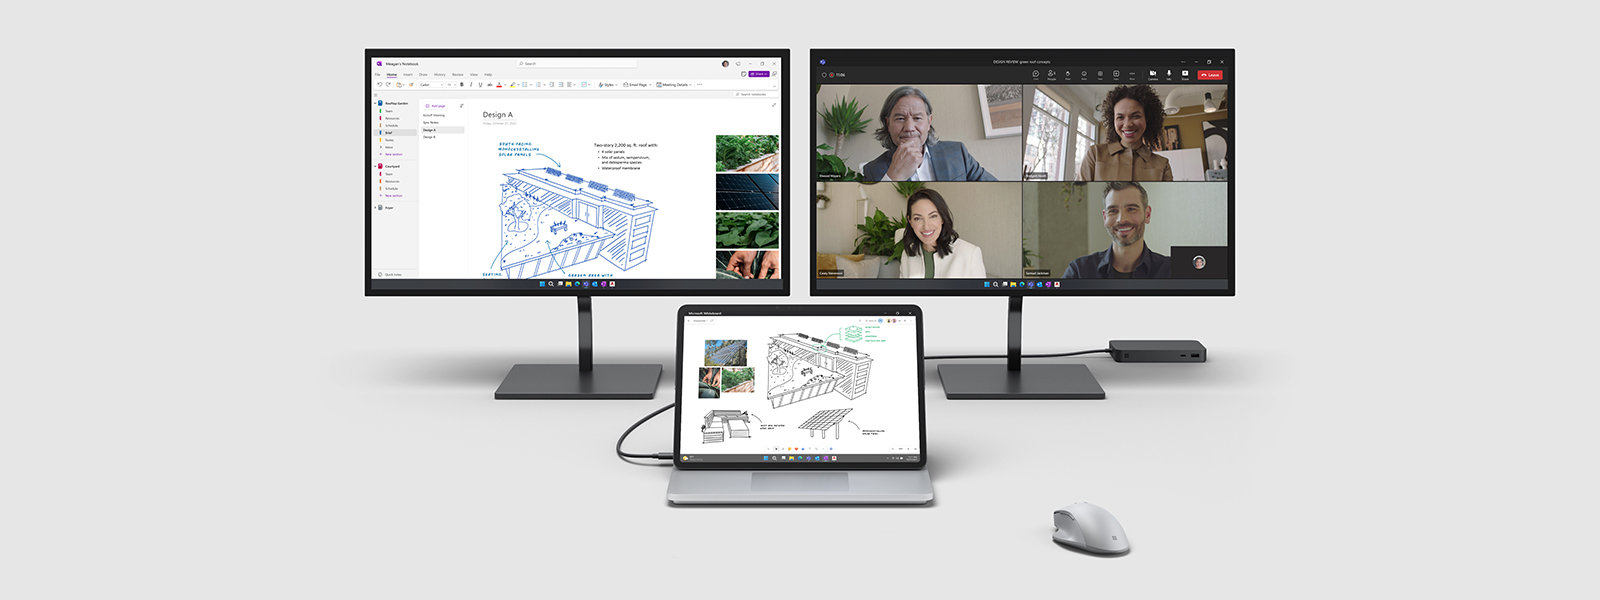 Surface Laptop Studio 2 observed connected to two external monitors with various Microsoft applications on the screens